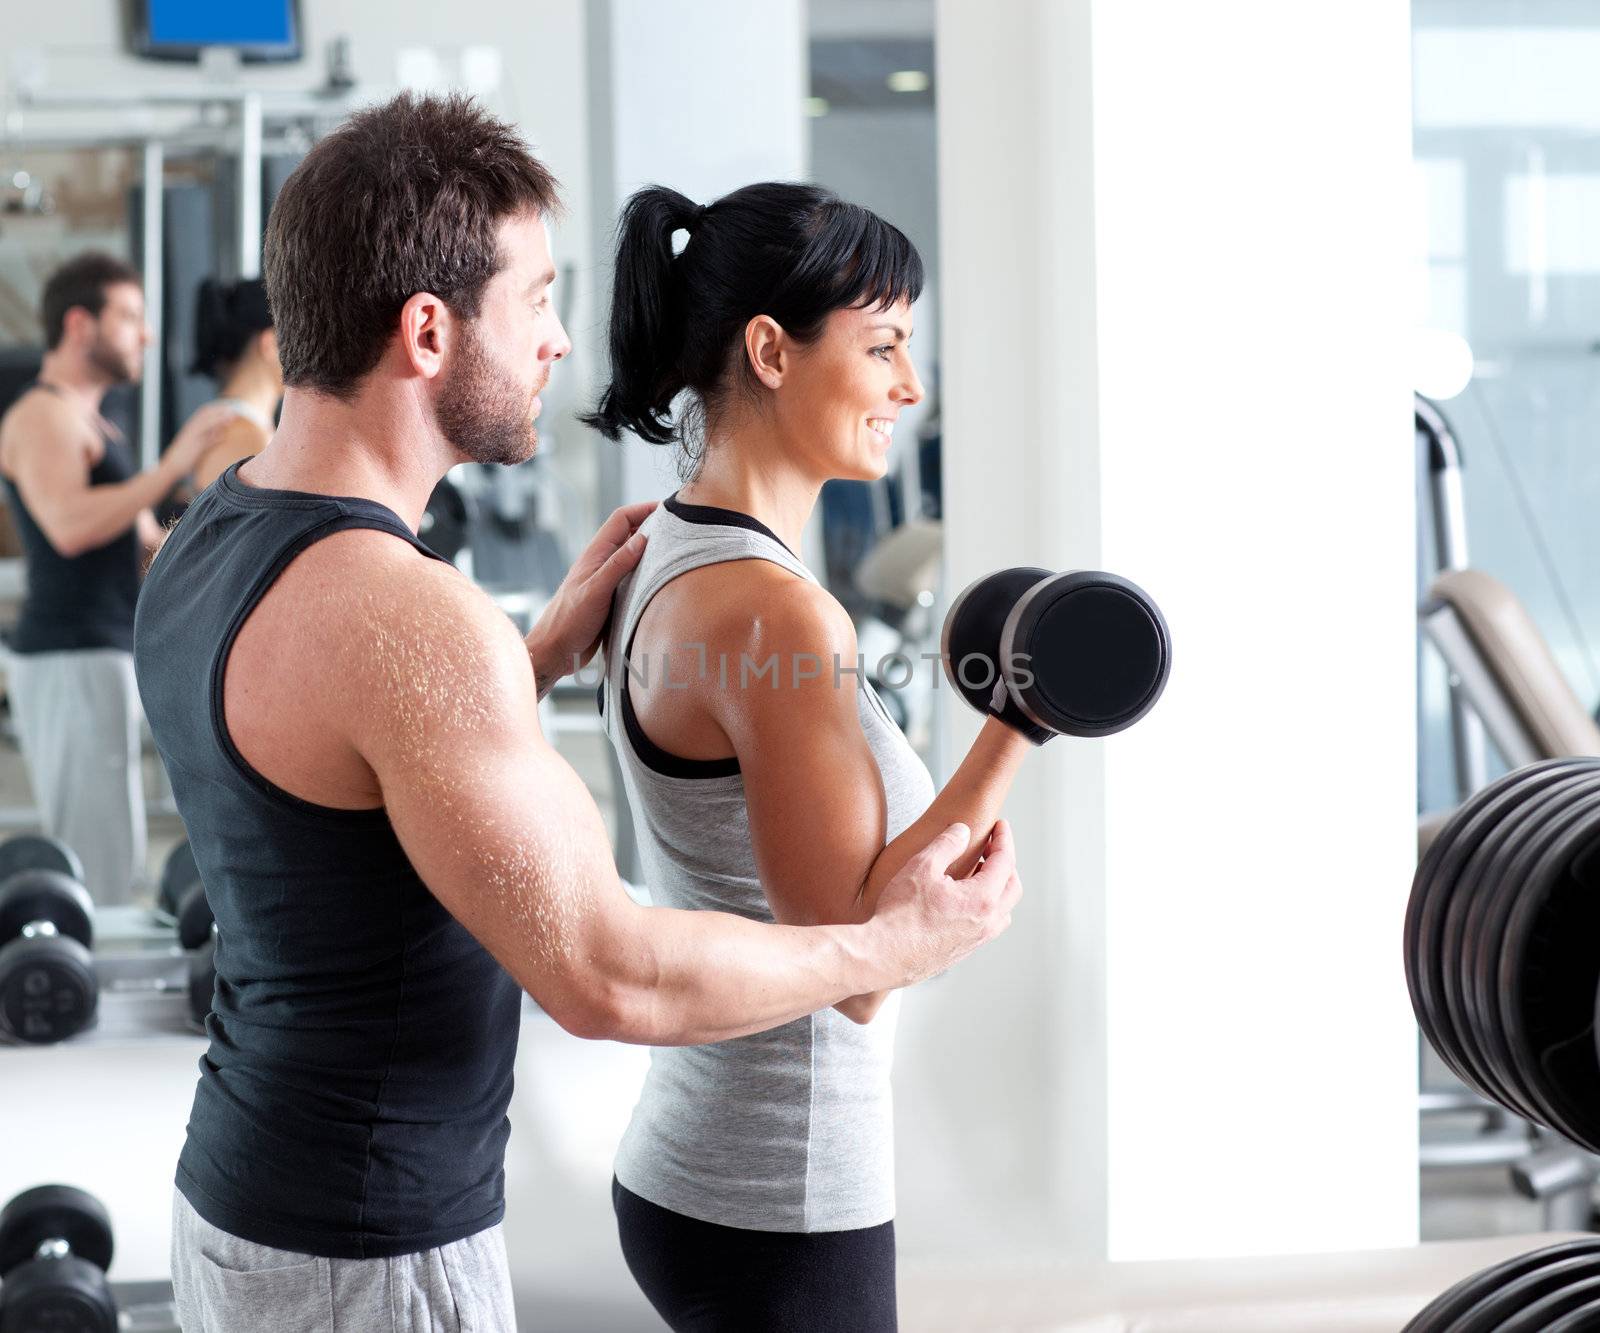 gym woman personal trainer with weight training by lunamarina